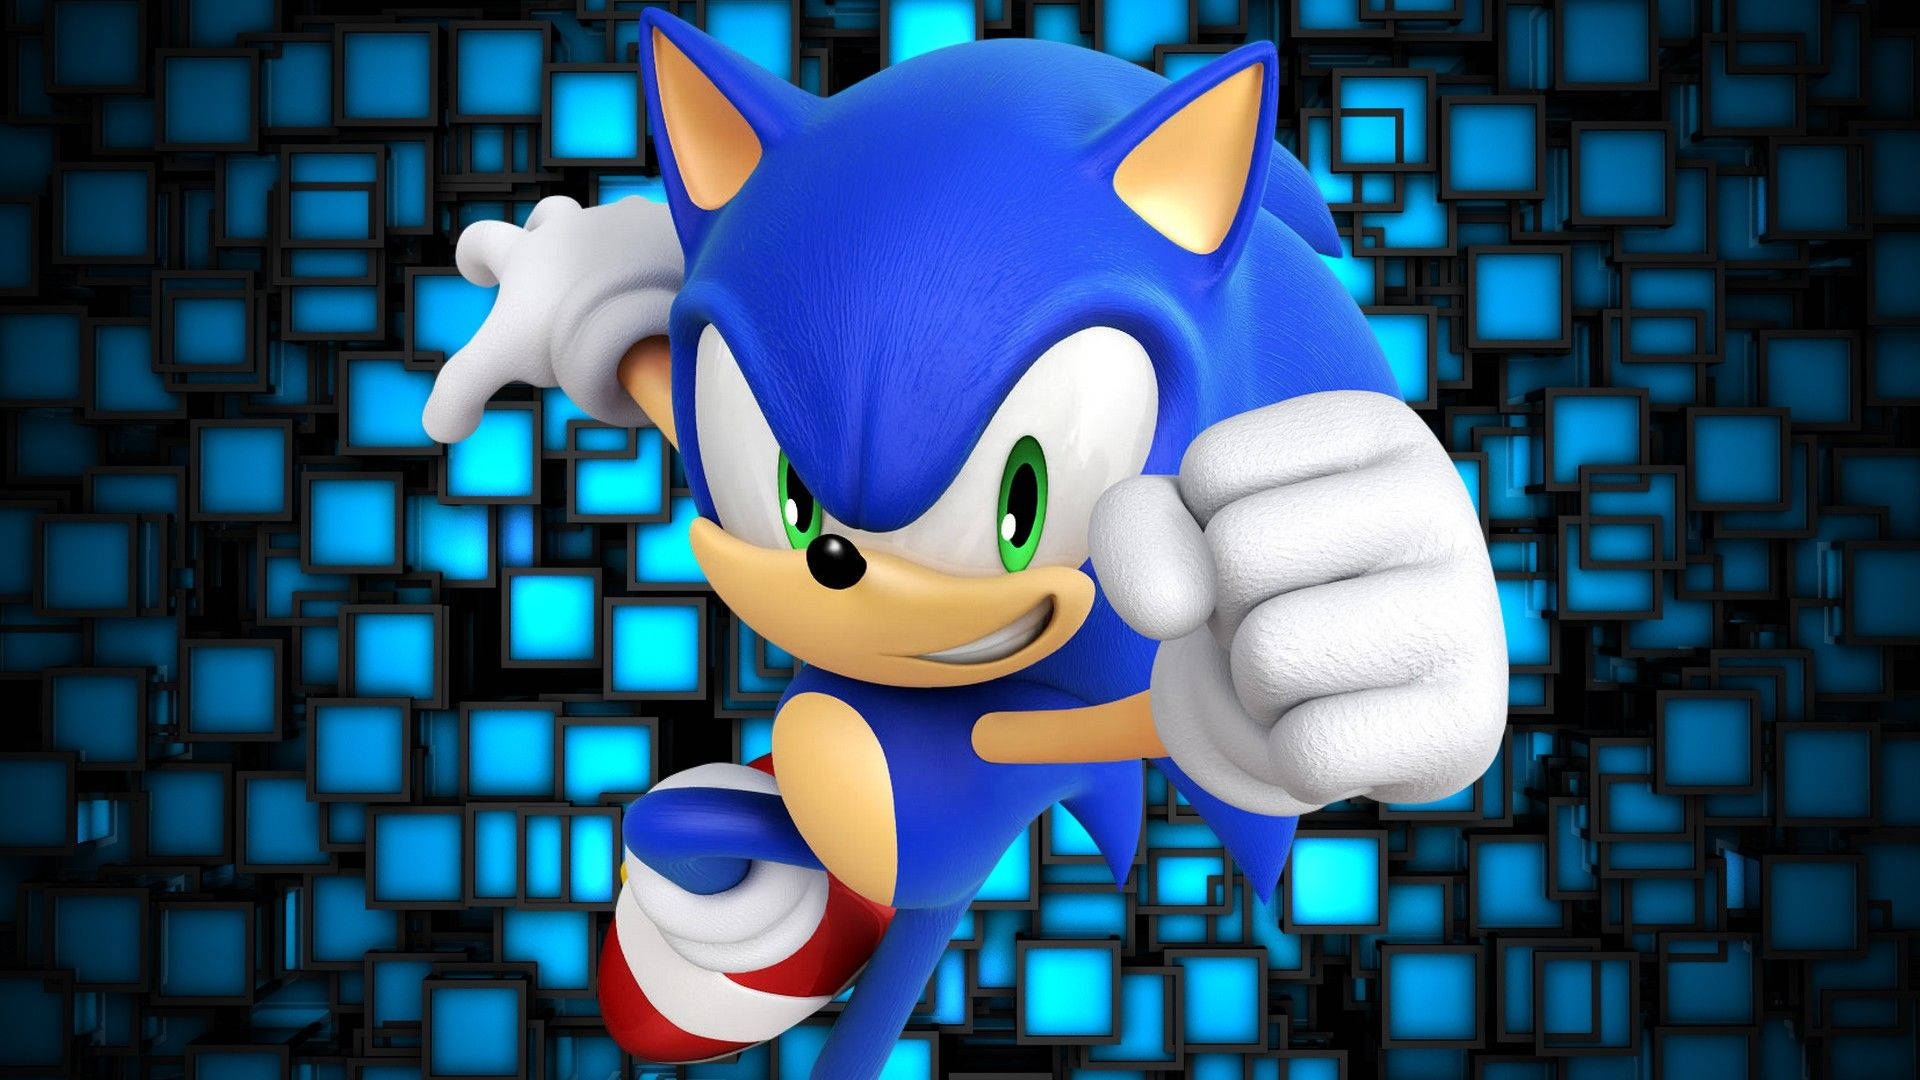 Join the adventure with Sonic The Hedgehog. Wallpaper